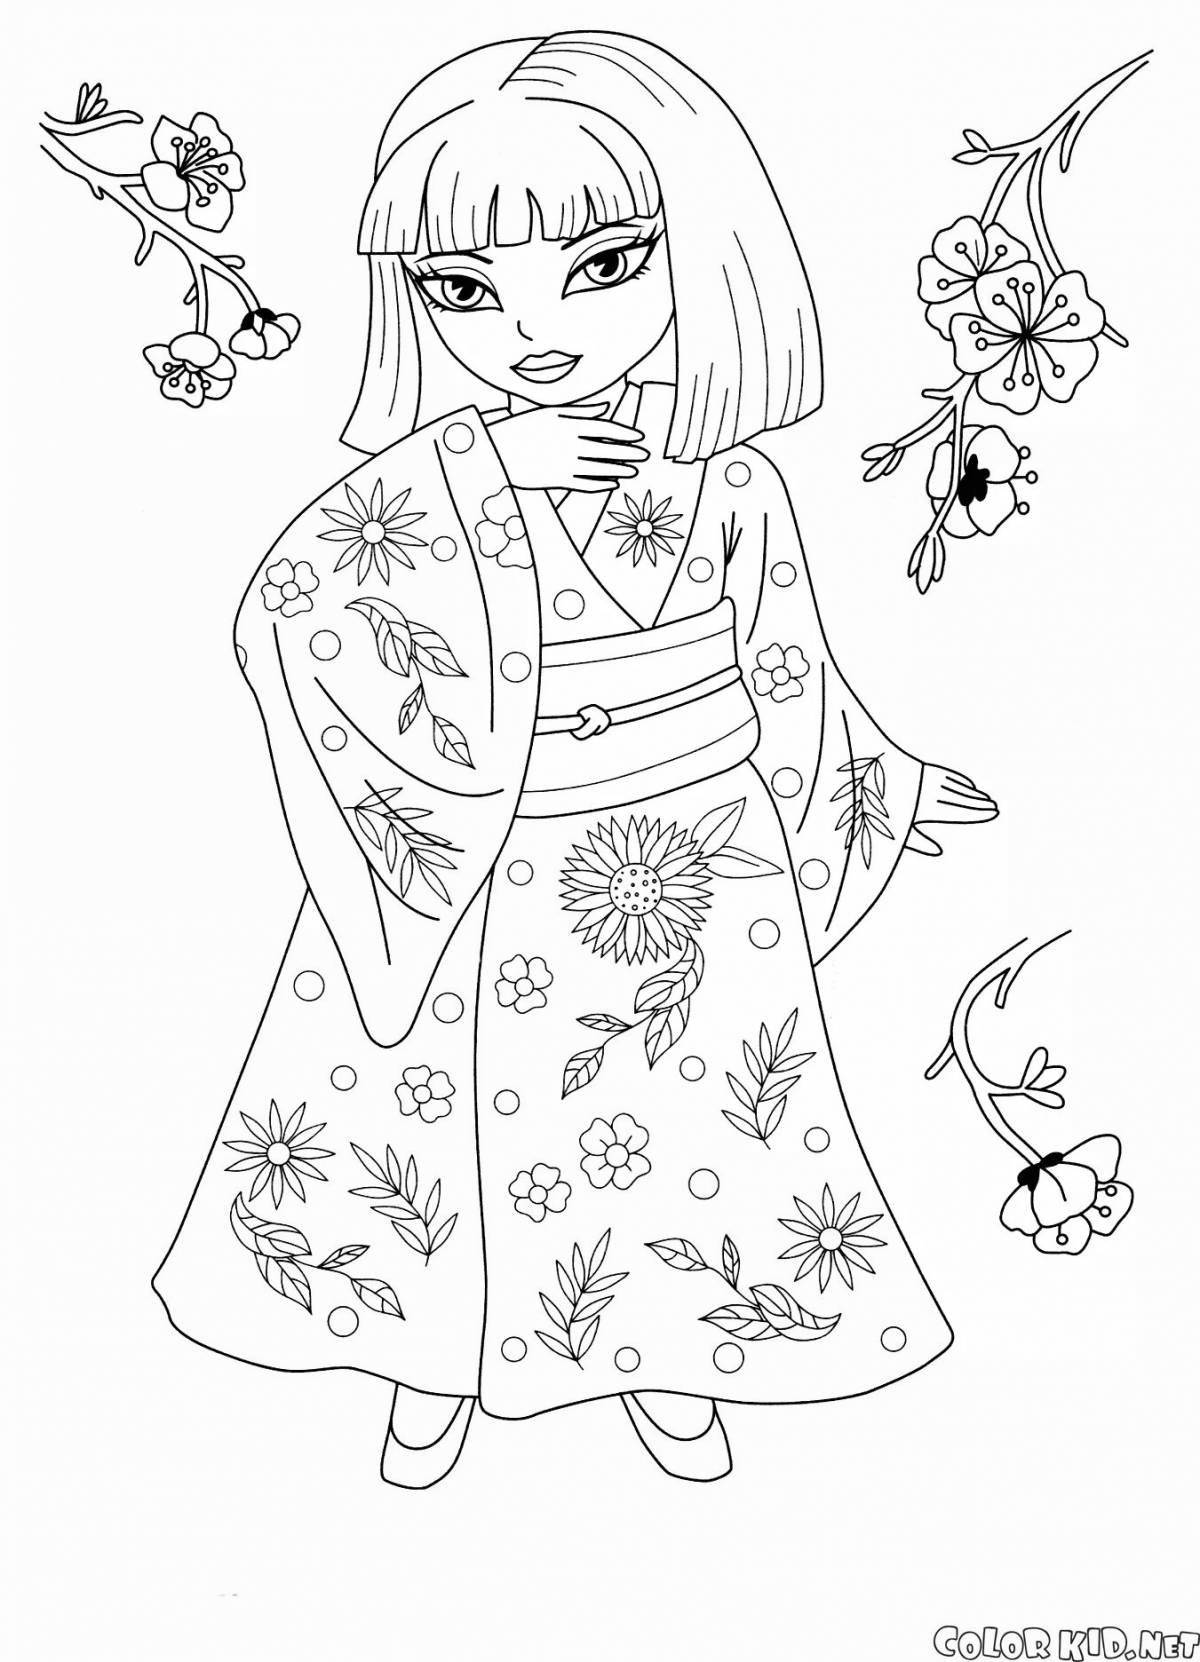 Colorful Japanese girl coloring book